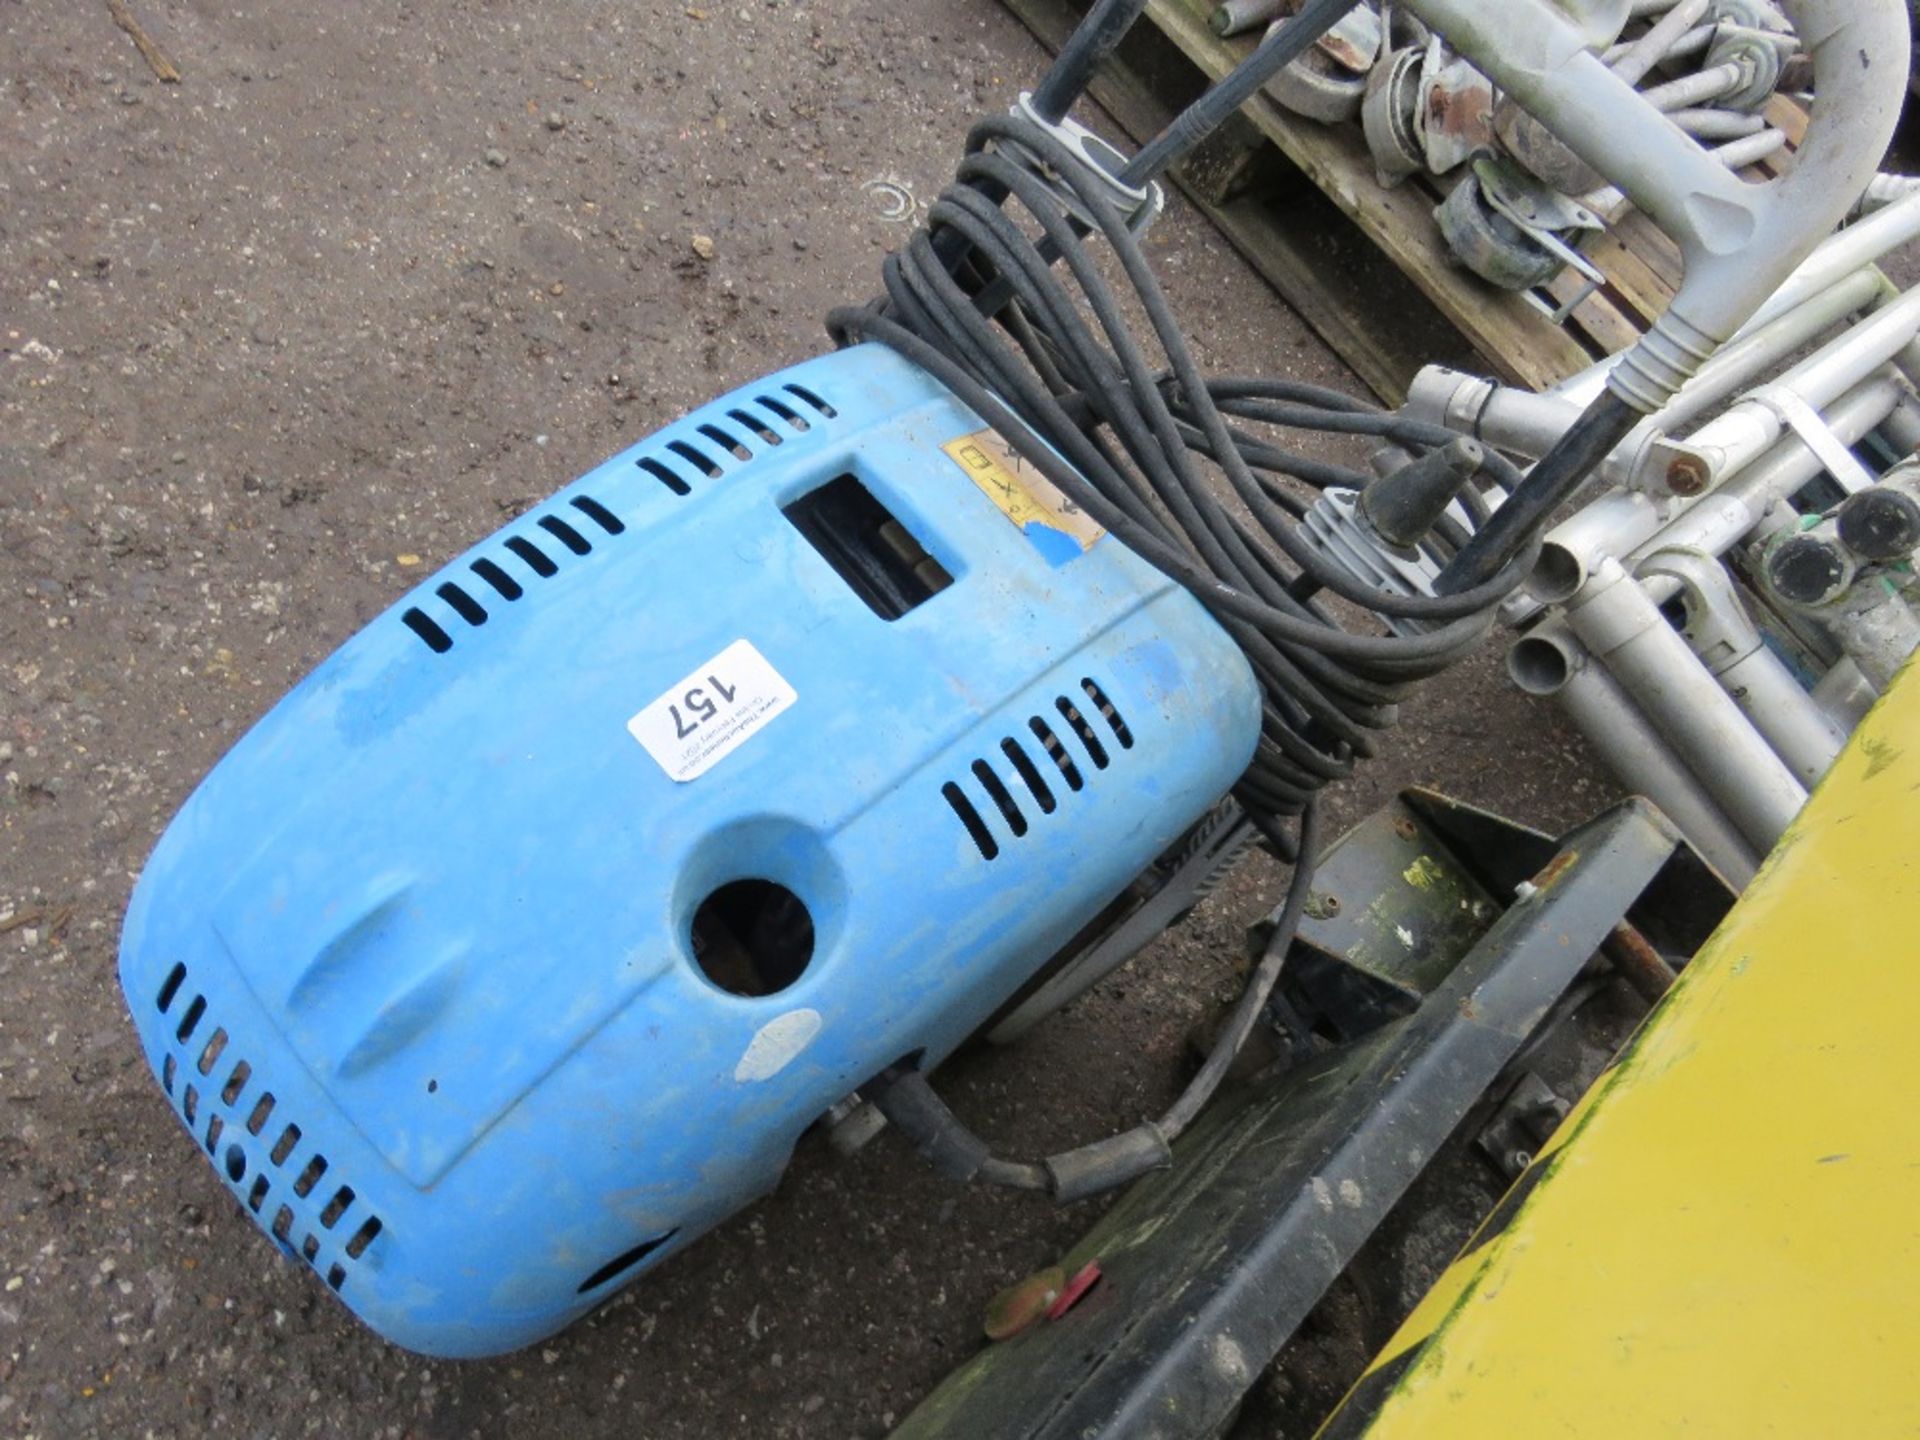 PRESSURE WASHER WITH HOSE AND LANCE. UNTESTED, CONDITION UNKNOWN. - Image 3 of 3